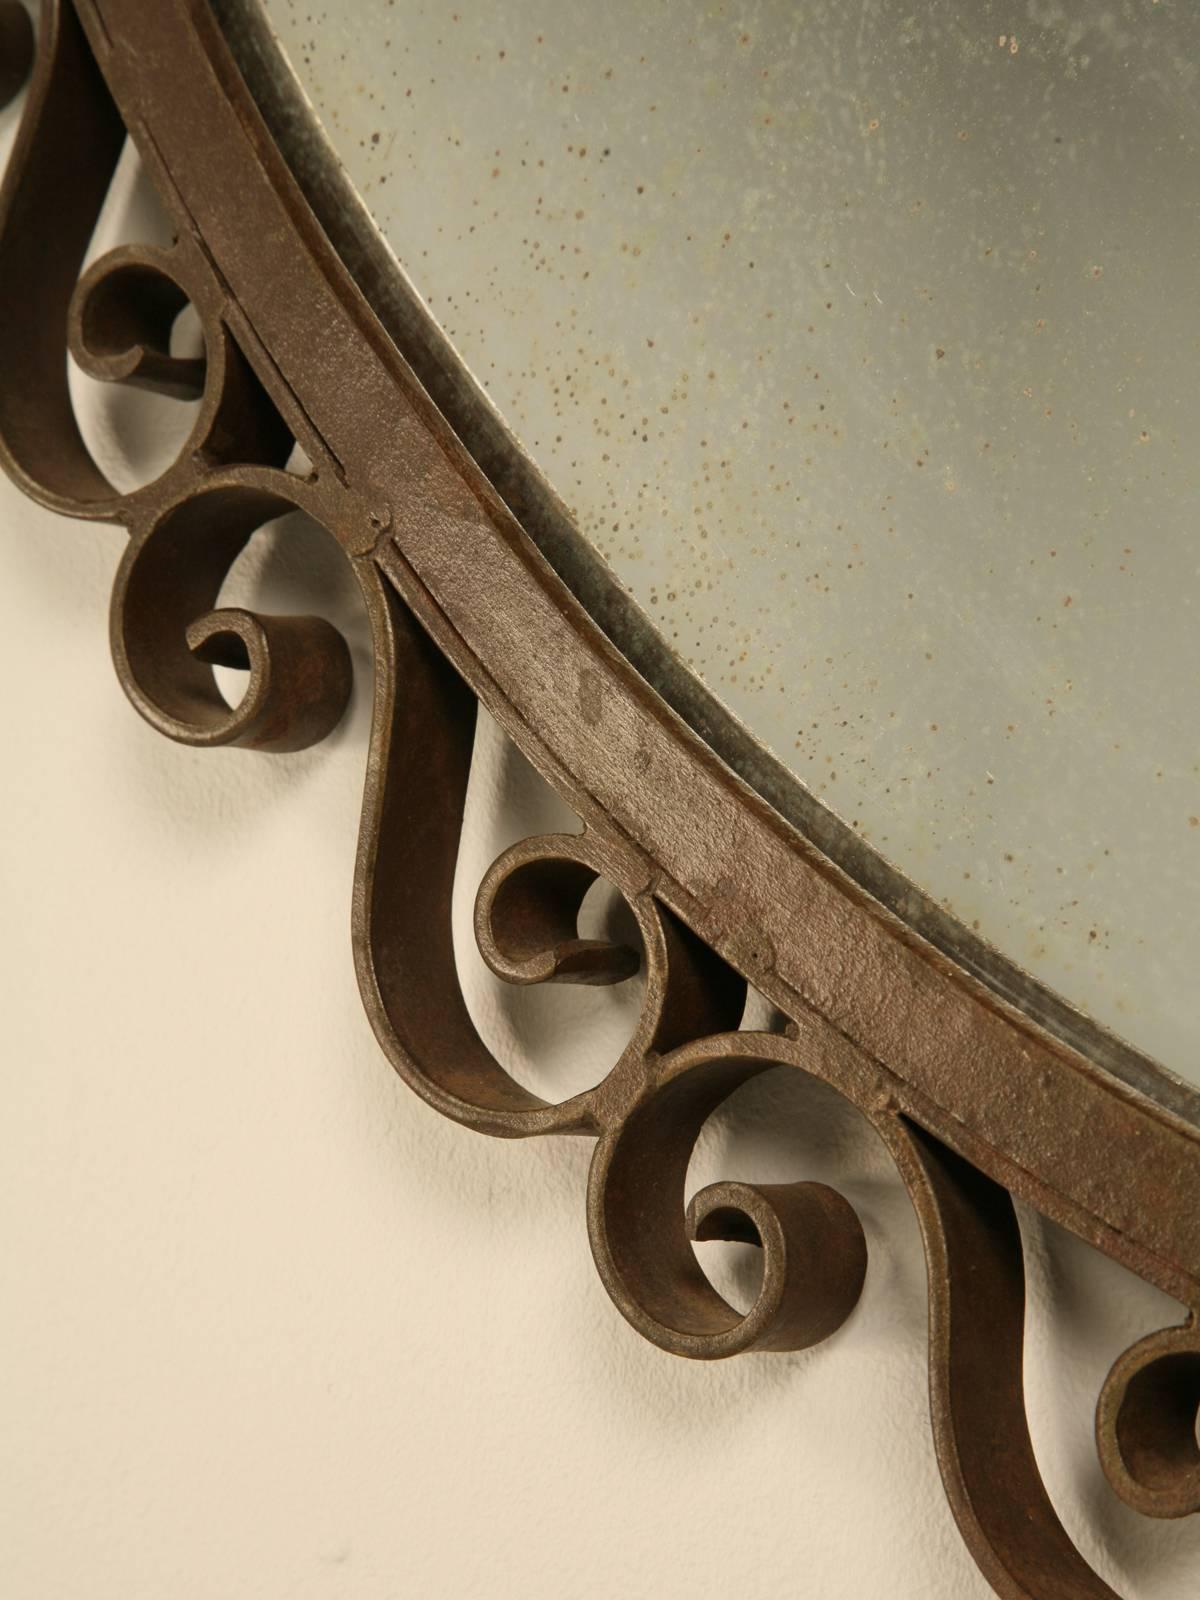 French Art Deco Round Mirror with Built-in Sconces circa 1930's For Sale 2